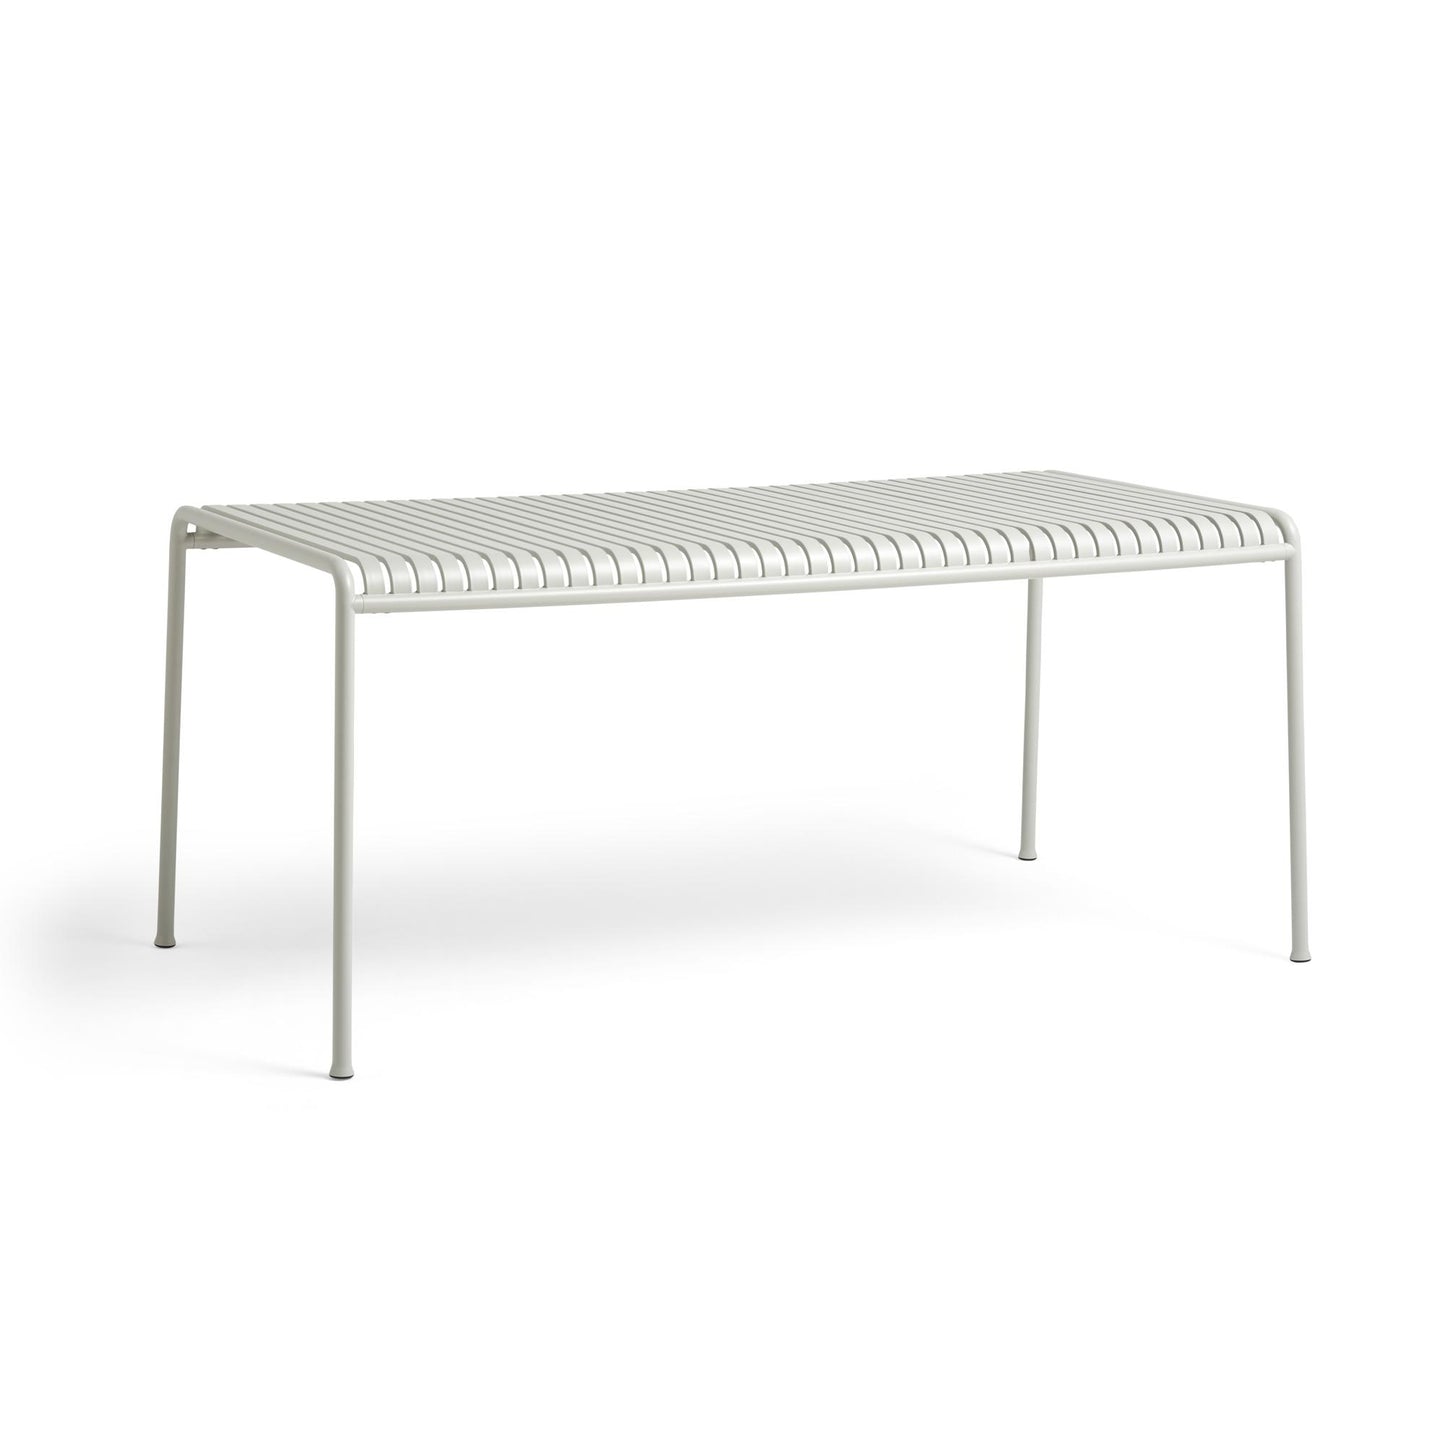 Palissade Table L170 by HAY #Sky Gray